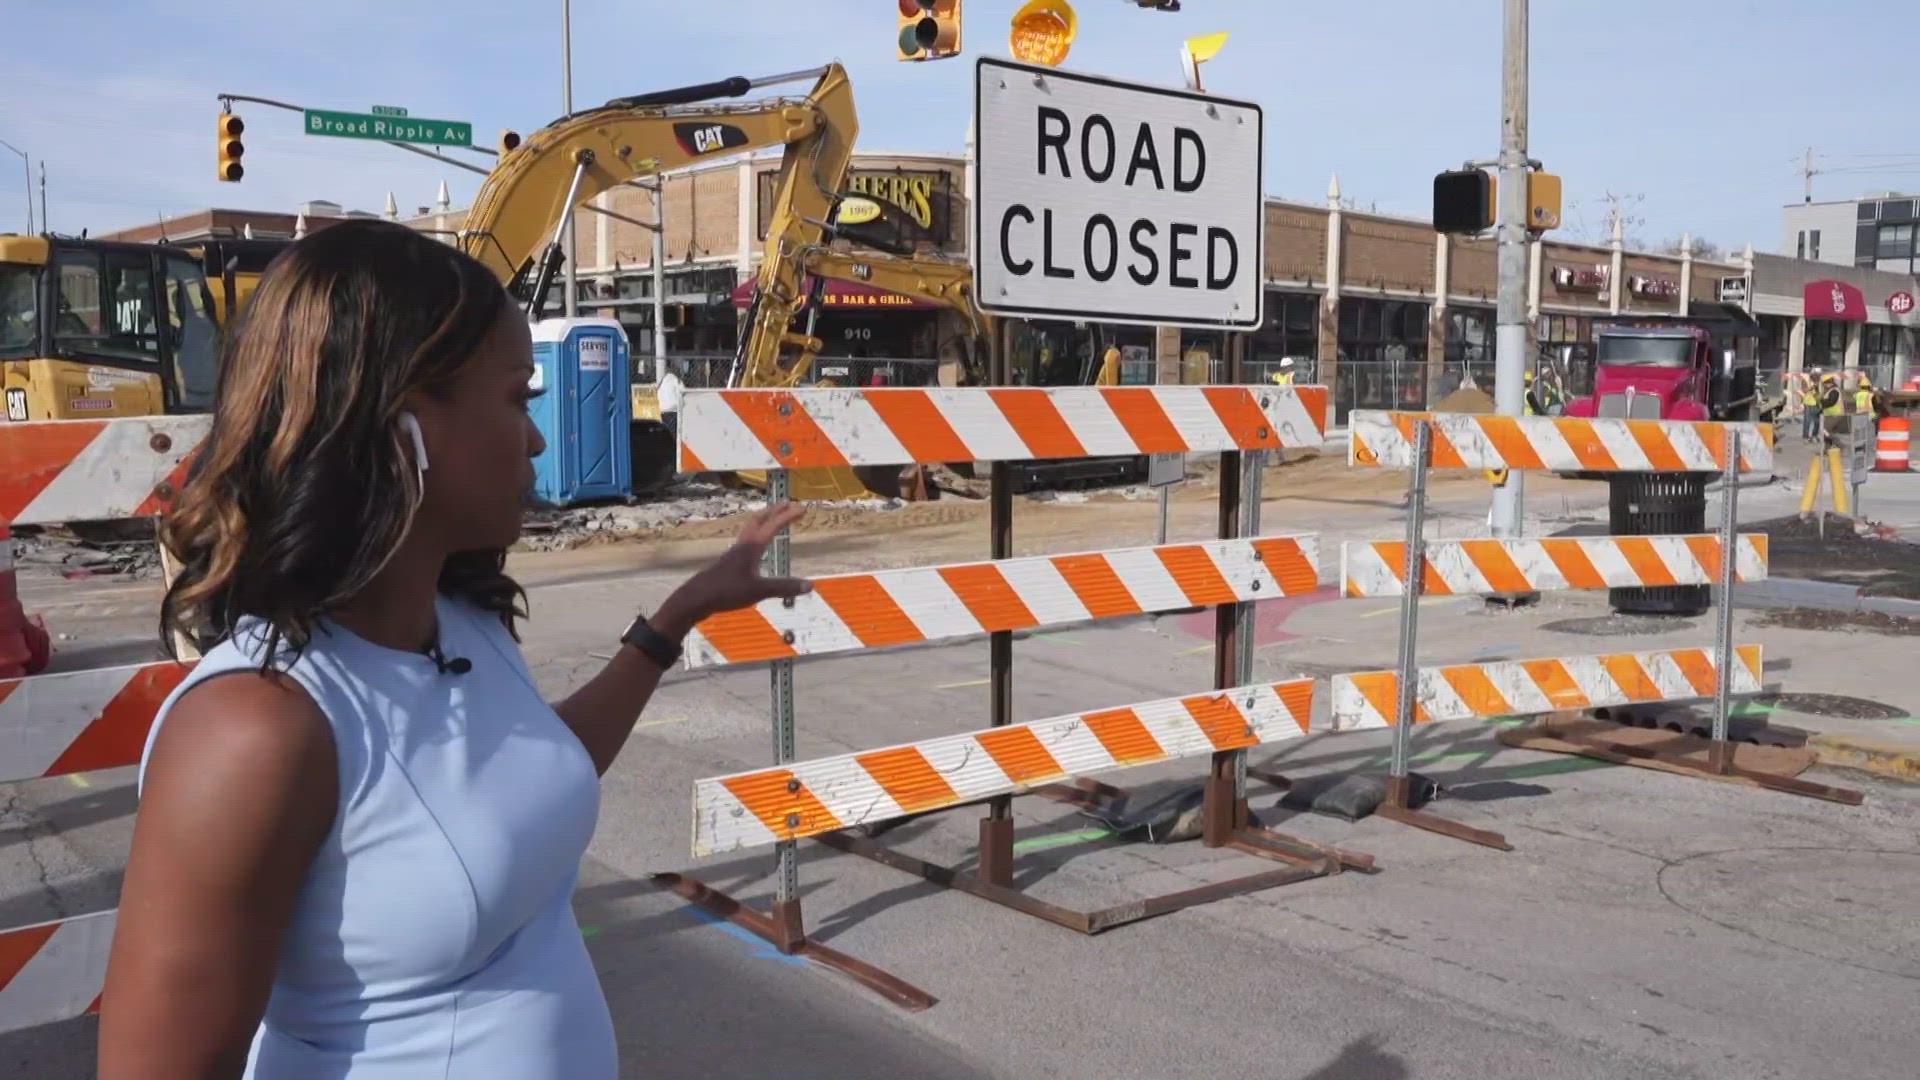 For about a month, crews will focus their work at the intersection of Guilford and Broad Ripple avenues, repairing the stormwater system.